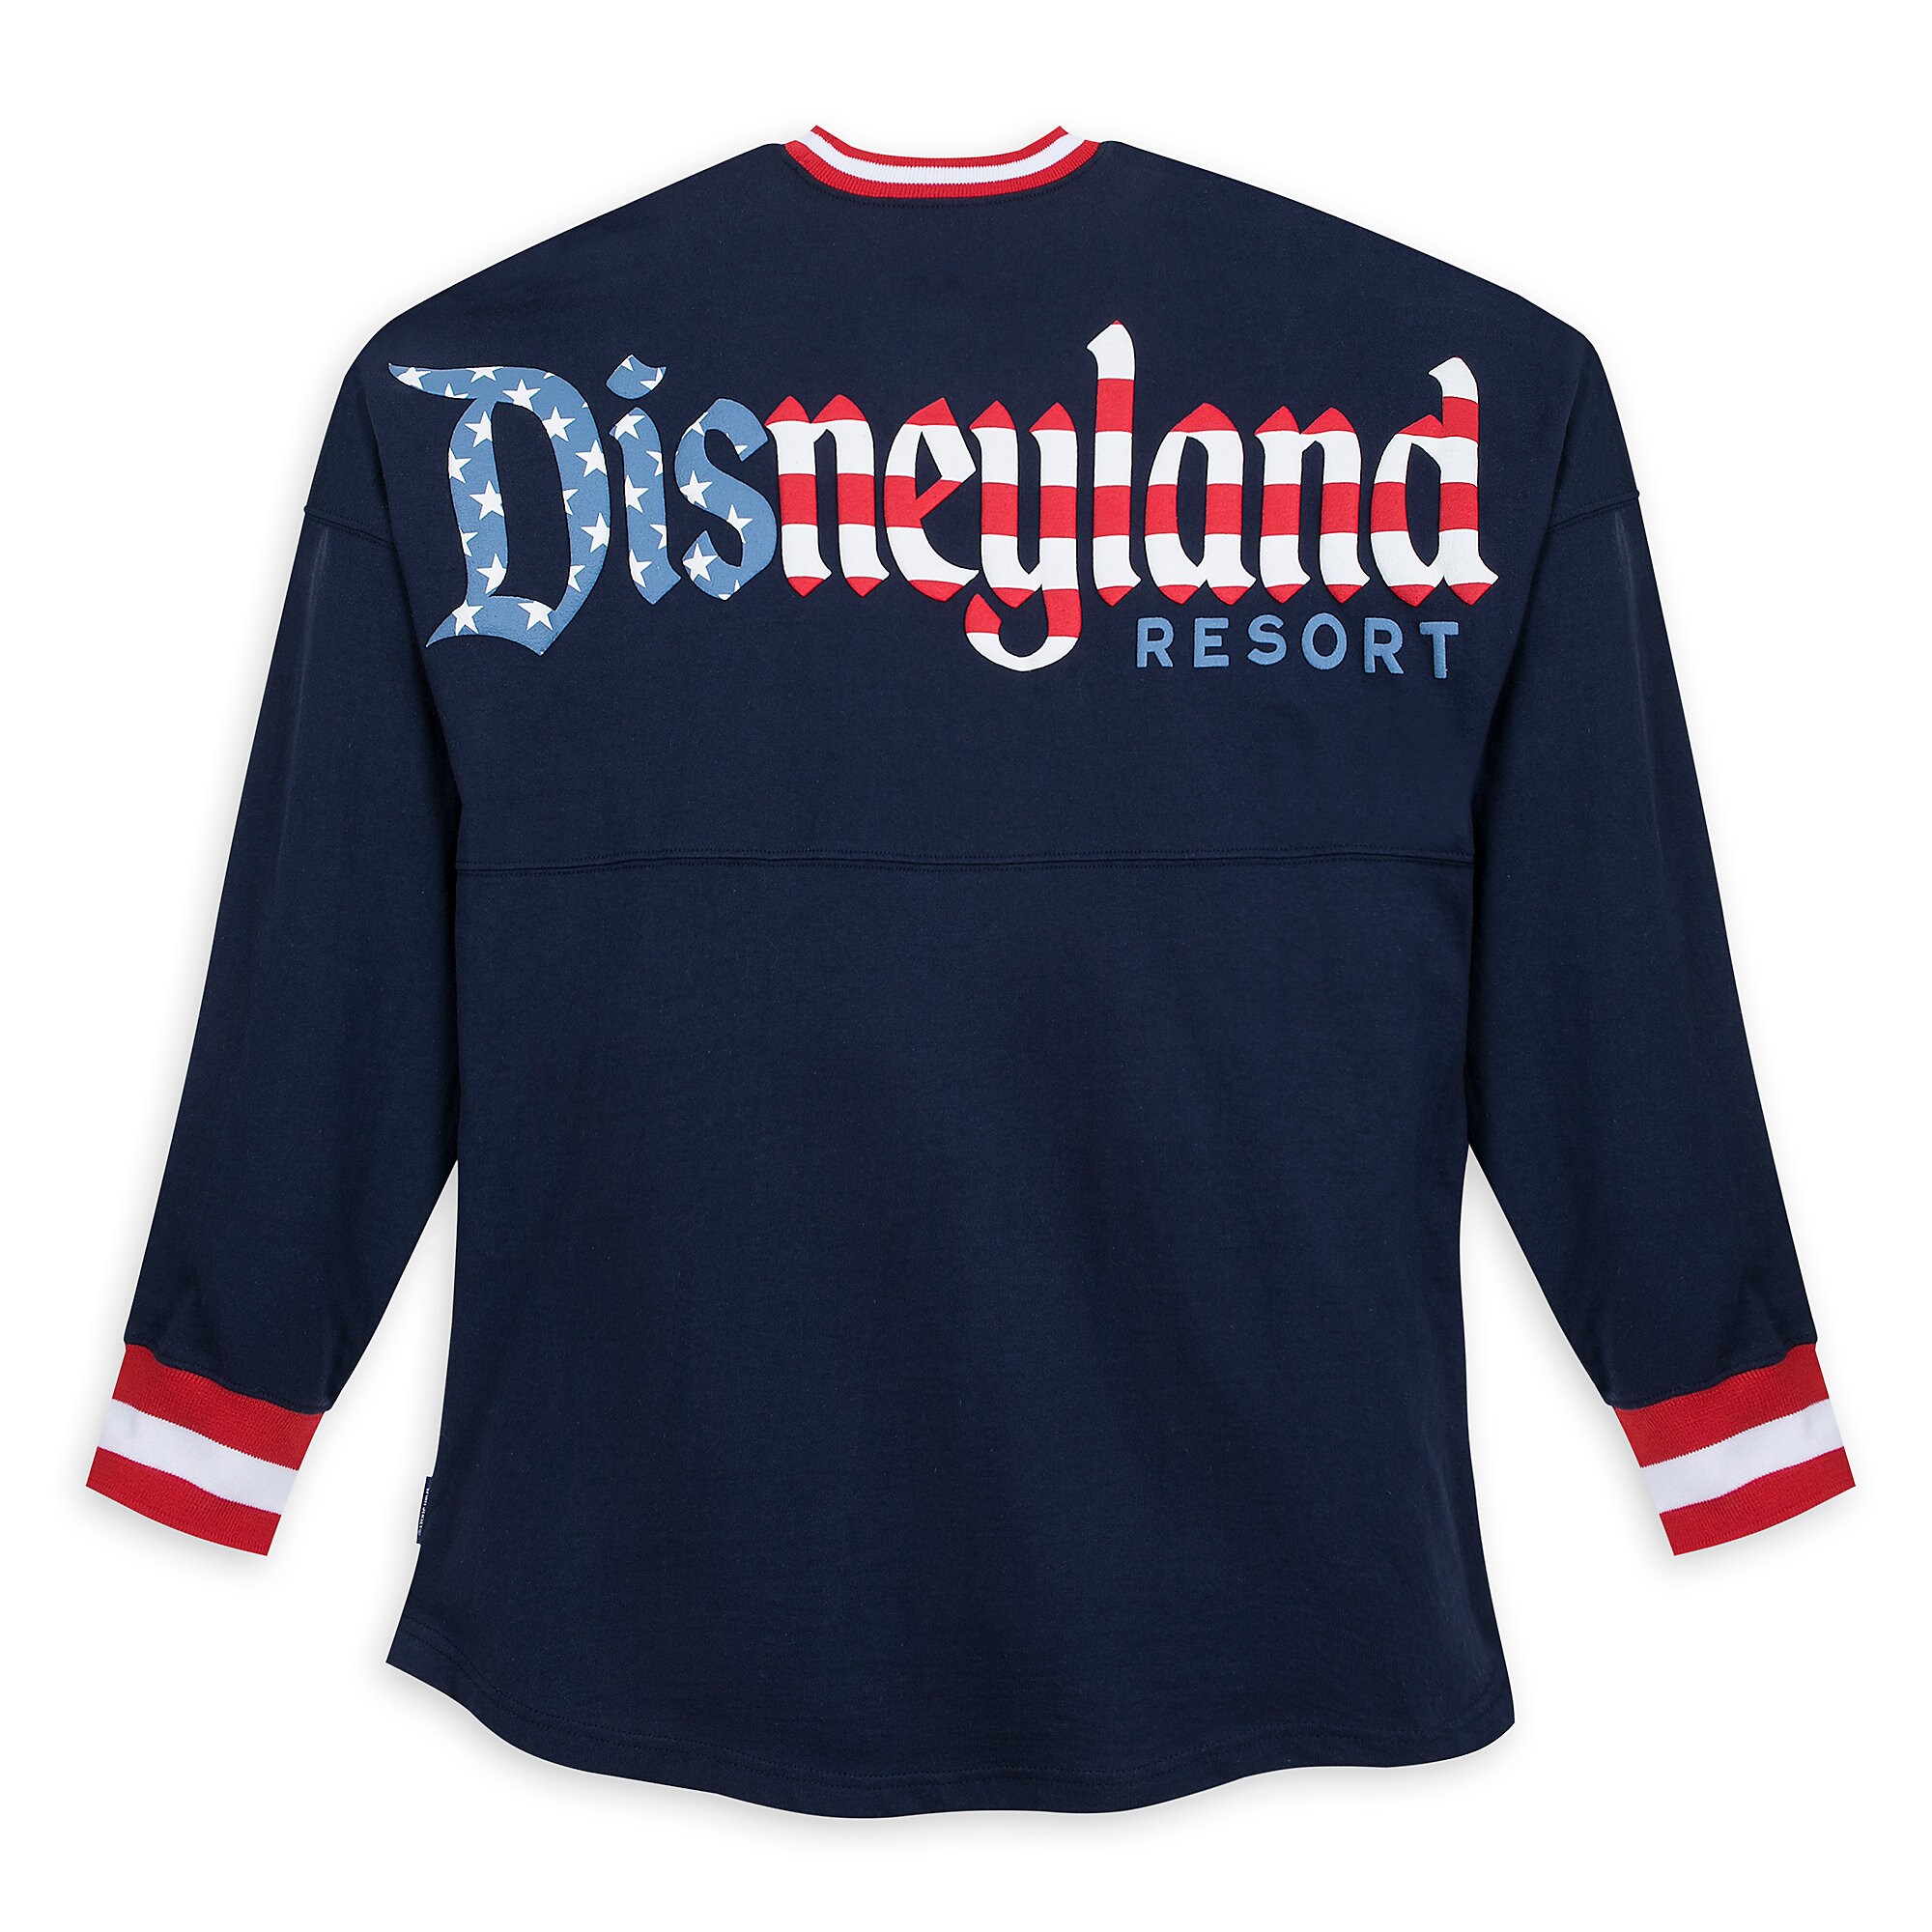 Mickey Mouse Americana Spirit Jersey for Adults - Disneyland